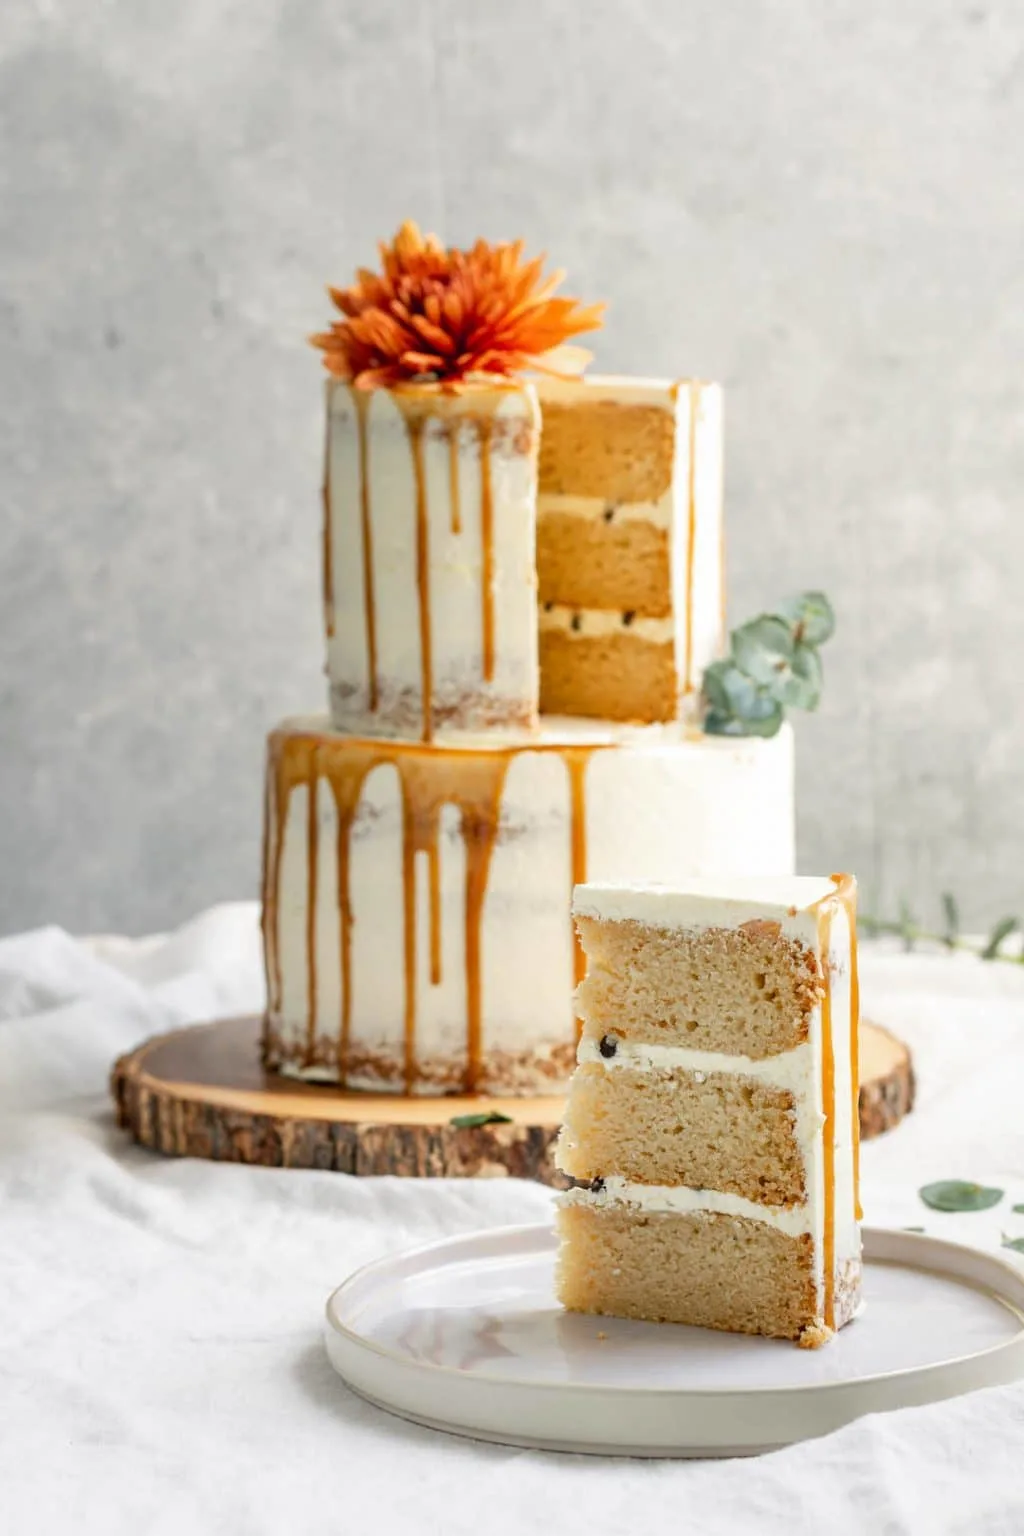 A 2-tier easy vegan vanilla cake decorated with flowers and a salted caramel drip with one slice cut out of it to reveal a 3 layer cake with chocolate chips in the buttercream filling